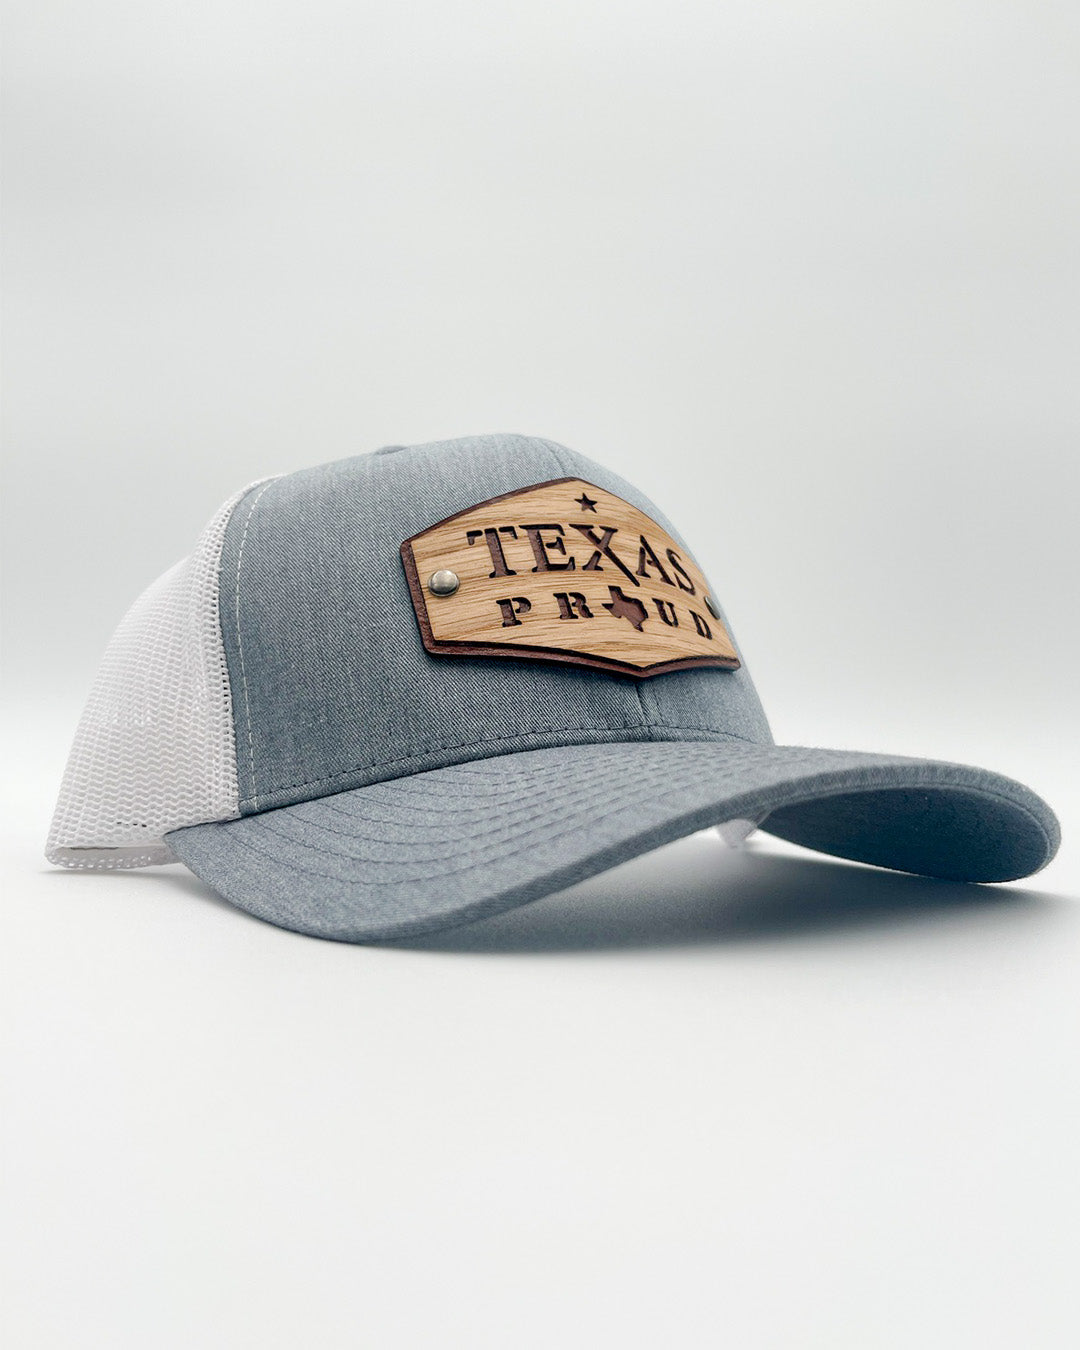 Affordable Custom Hats & Caps Black Texas Proud Edition Hat Real Wood Patch FlexFit Fitted Cap Cheap Custom Apparel